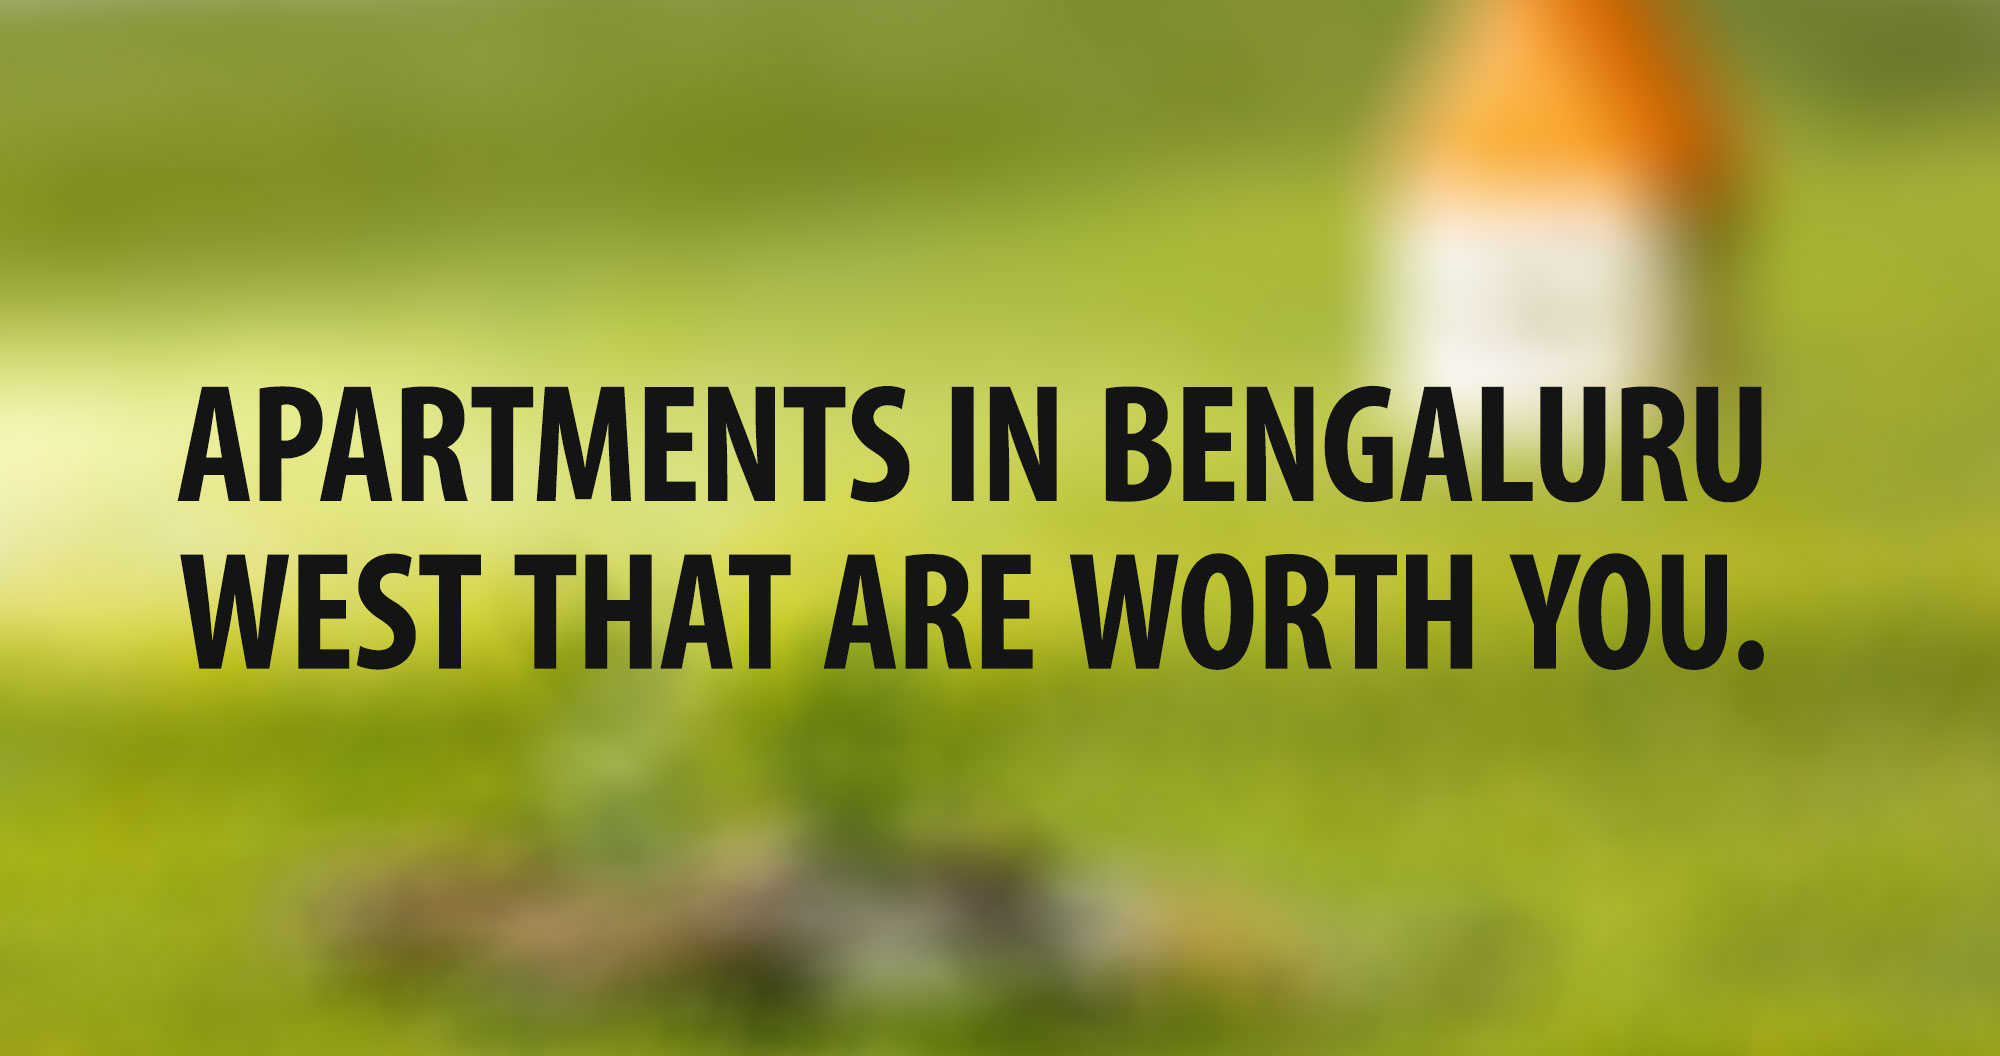 Apartments in Bengaluru West that are worth you